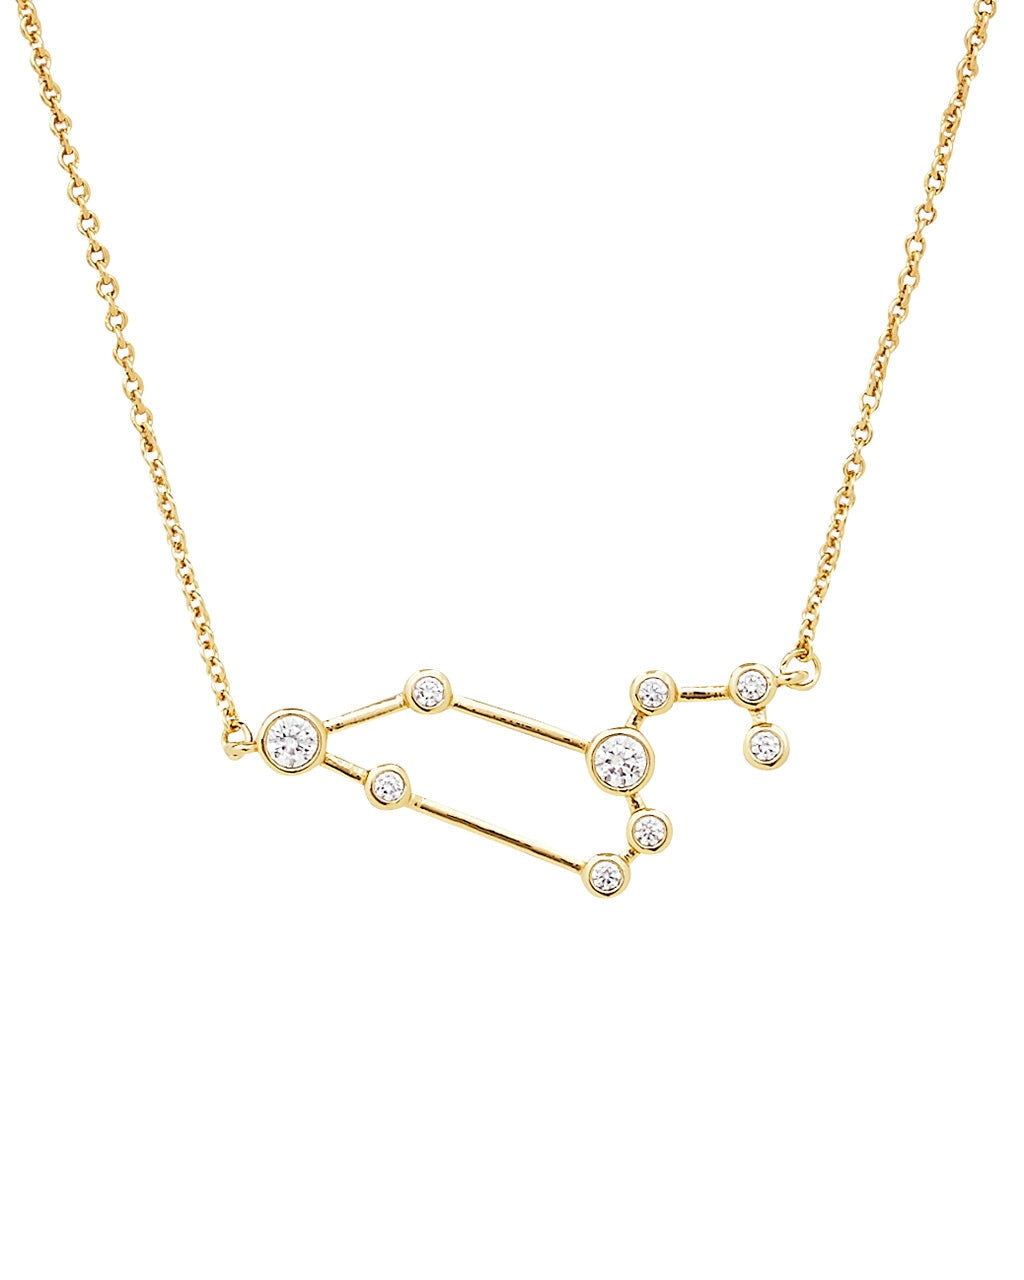 'When Stars Align' Constellation Necklace Necklace Sterling Forever Gold Leo (Jul 23 - Aug 22) 